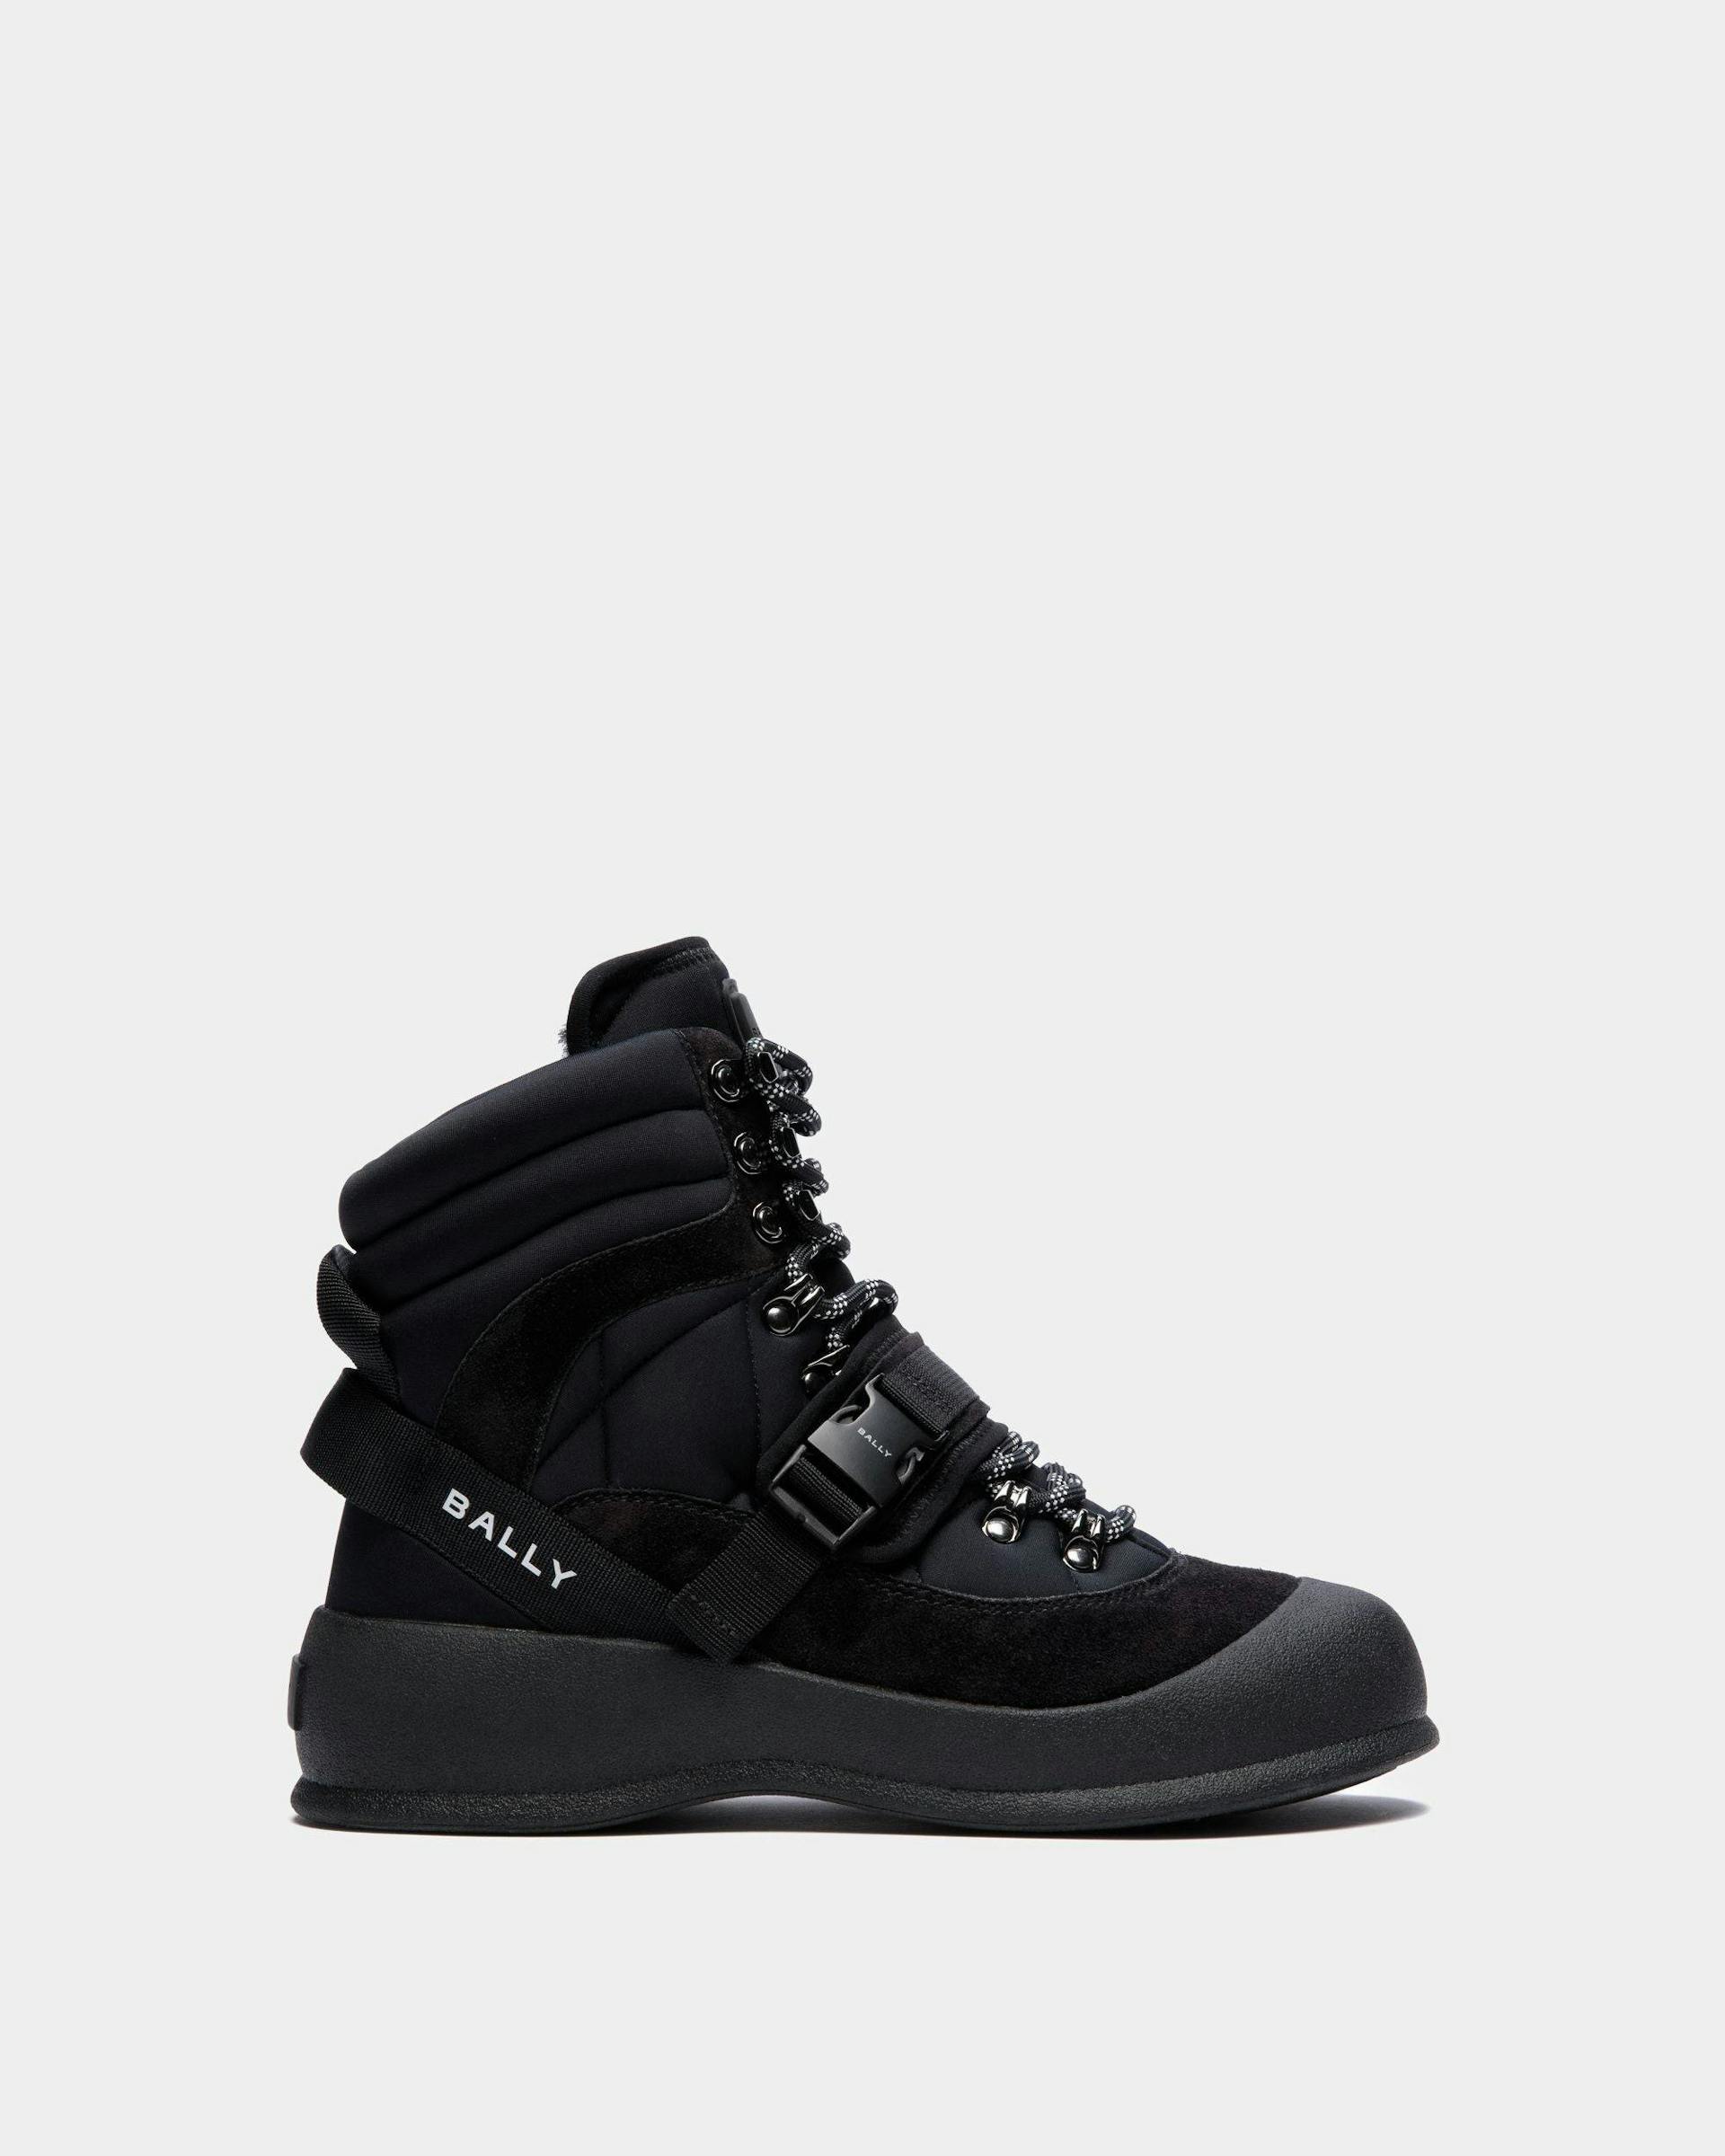 Women's Frei Lace-Up Boot In Black Nylon | Bally | Still Life Side